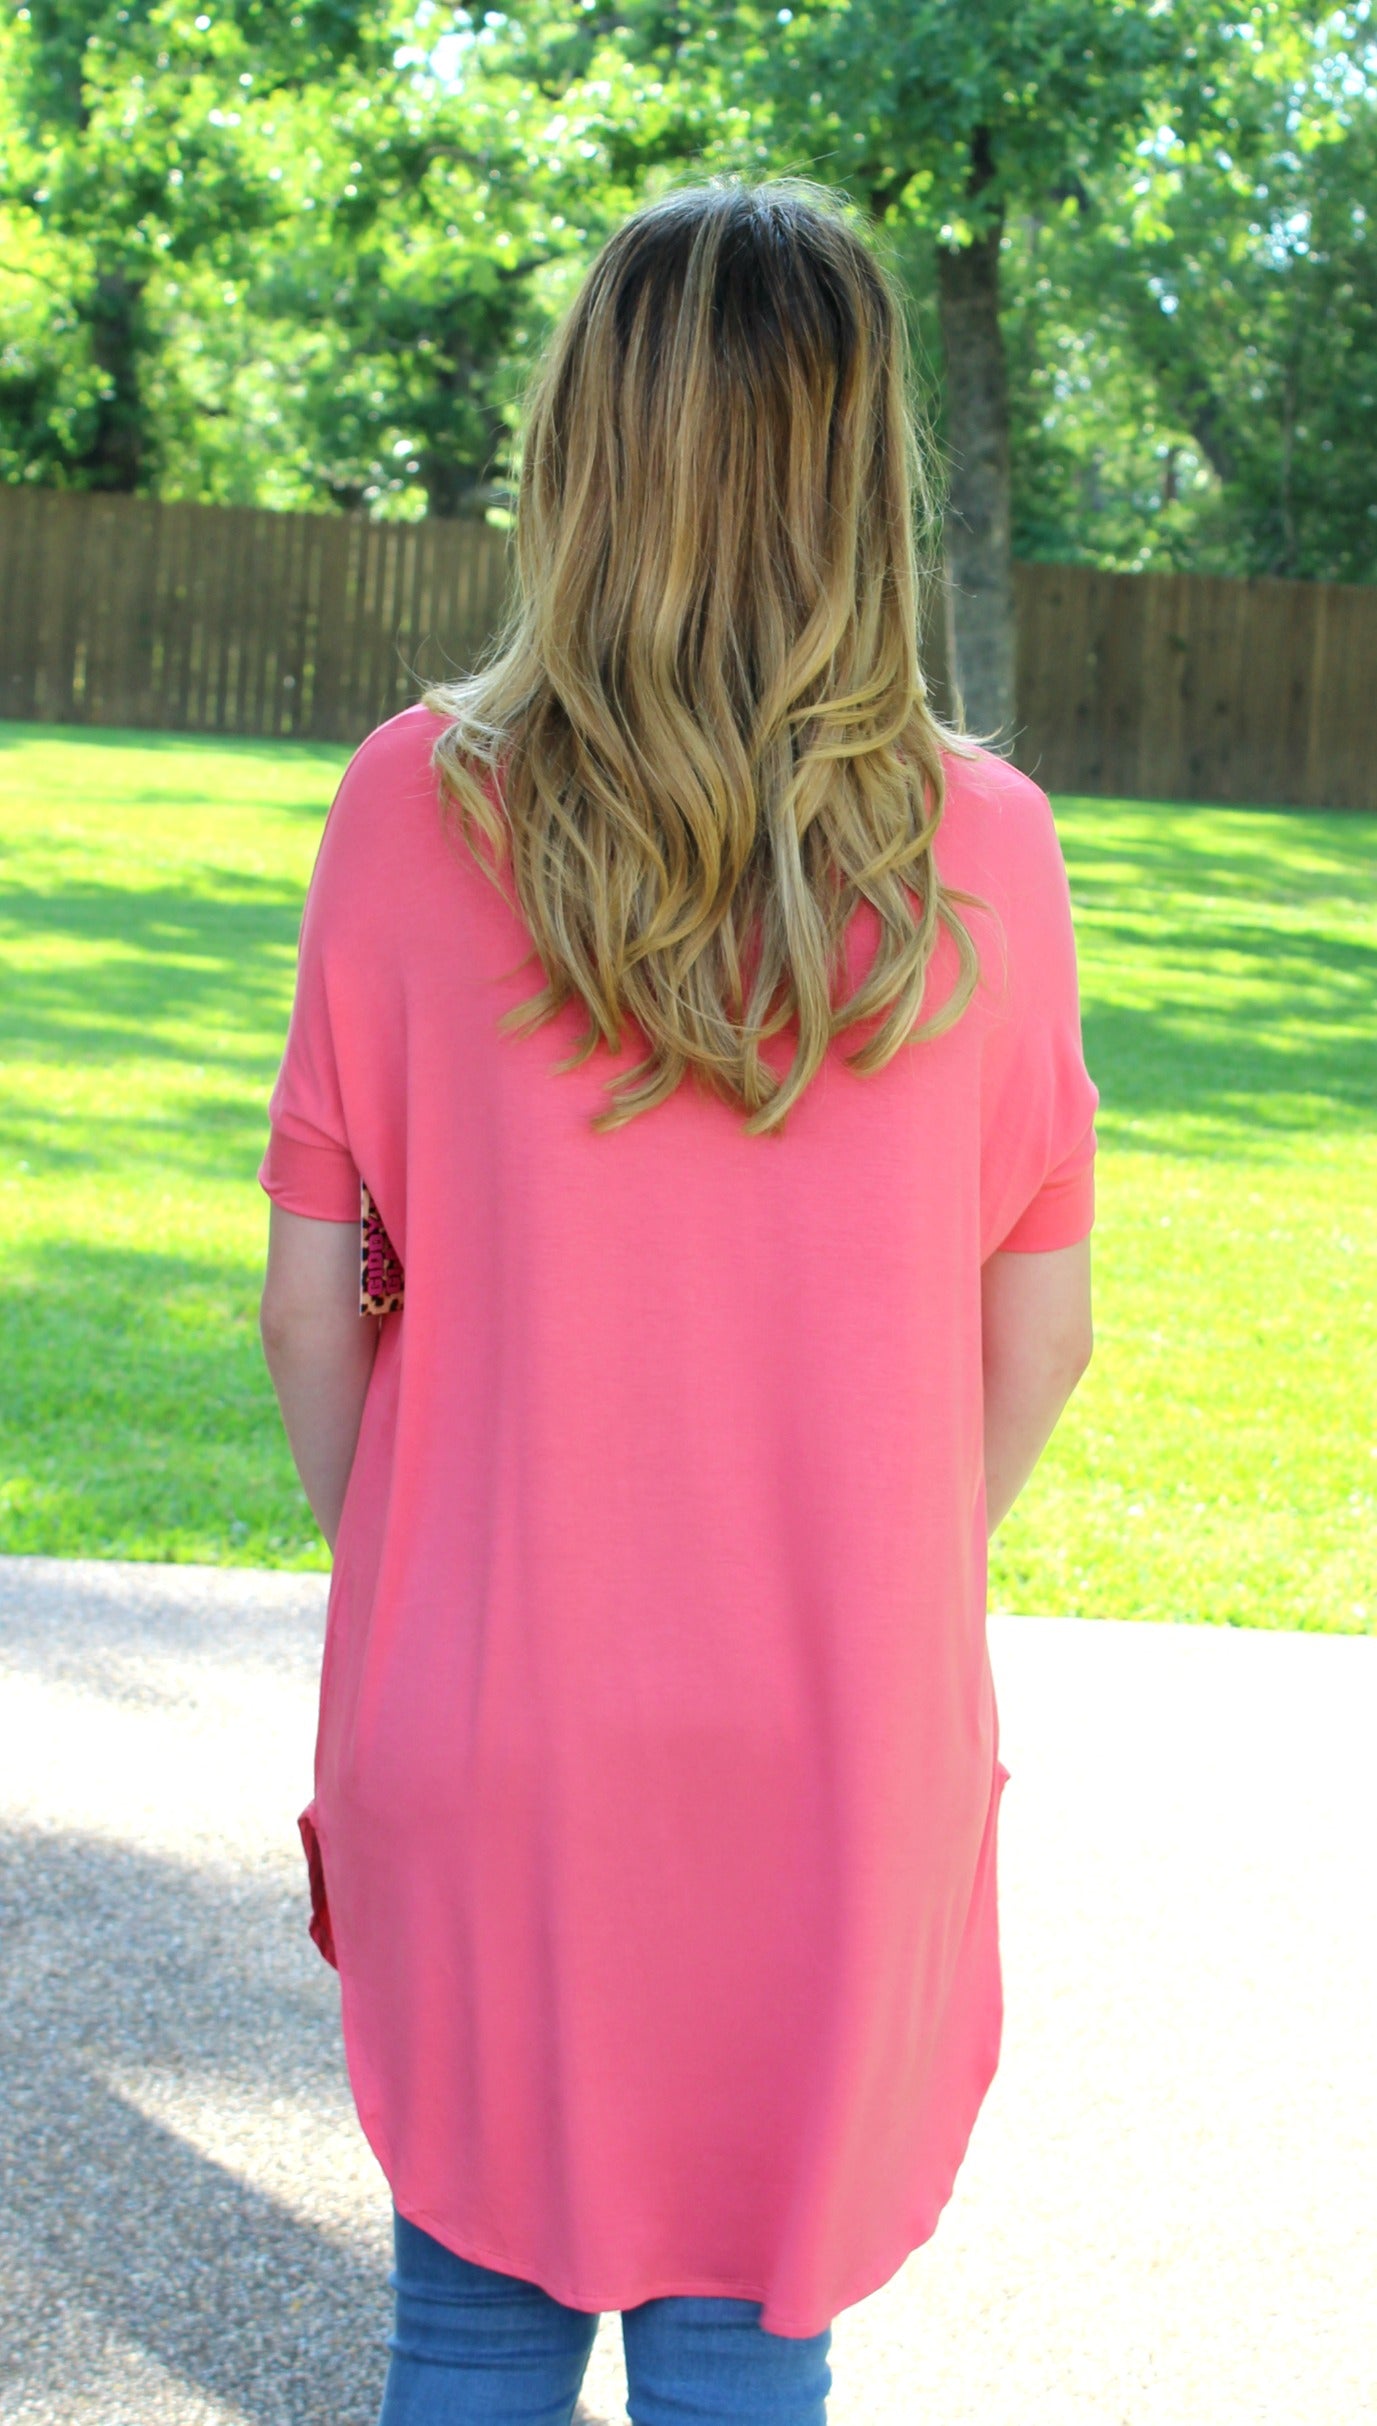 The Only Truth Short Sleeve Piko Tunic in Coral - Giddy Up Glamour Boutique